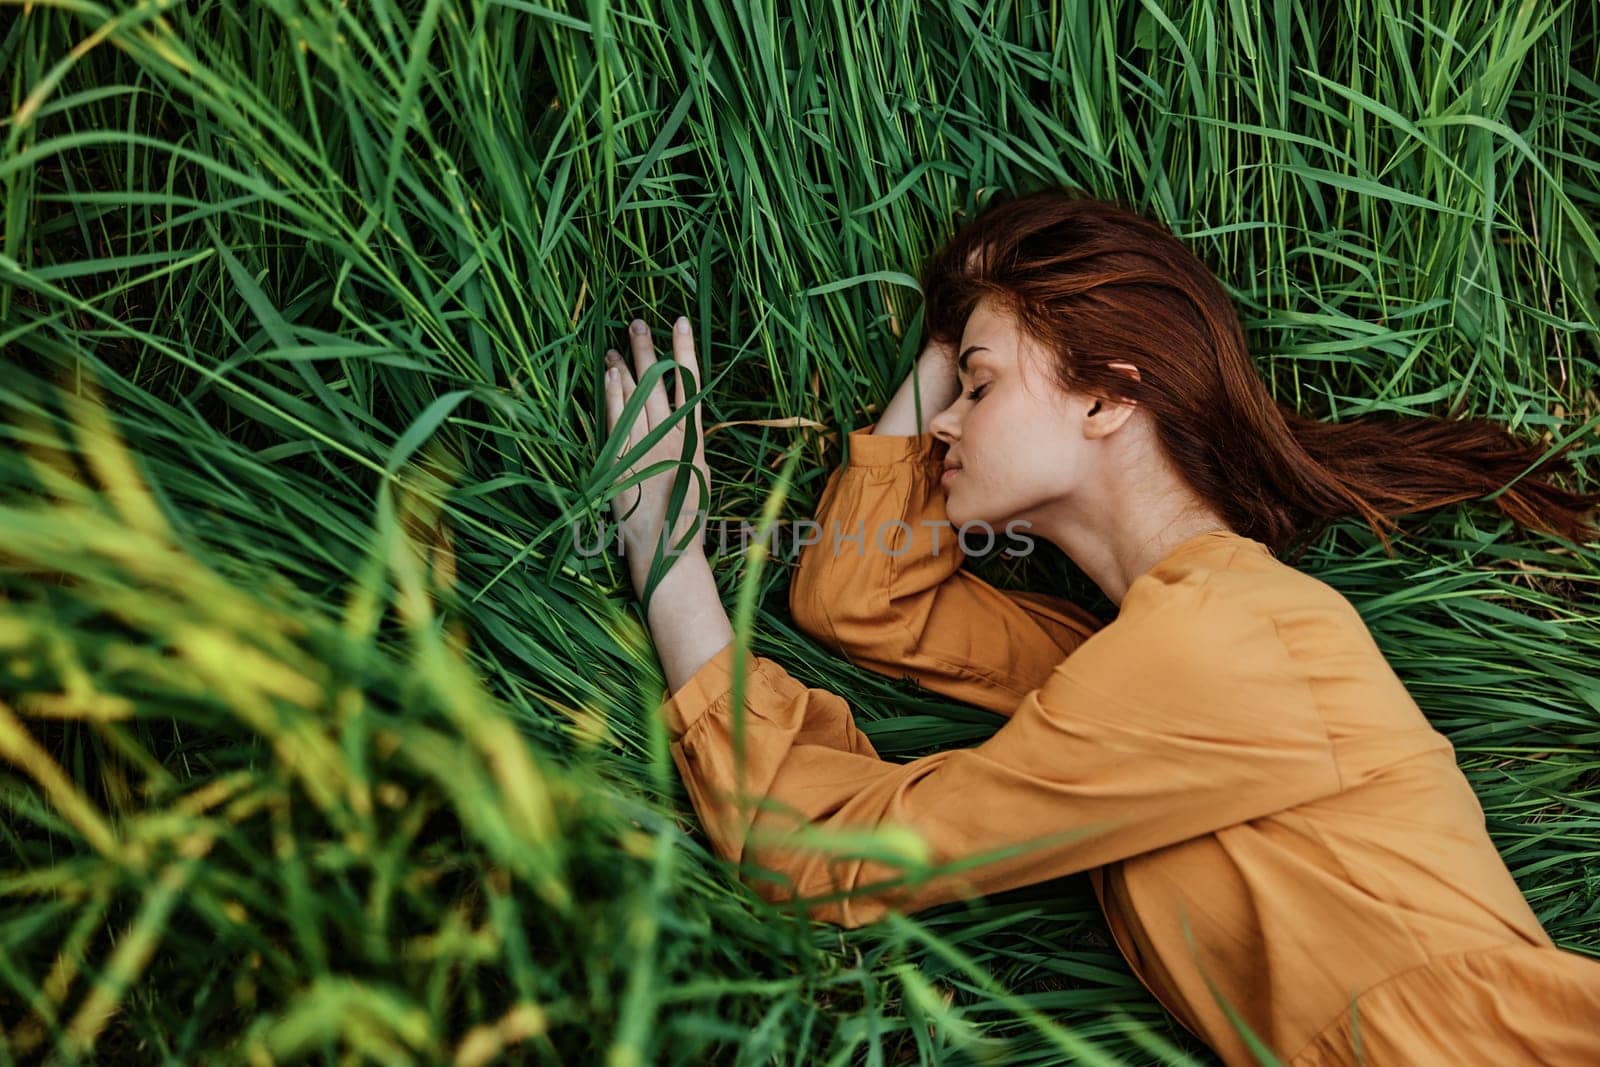 a close horizontal photo of a pleasant woman in a long orange dress resting lying in the tall grass with her eyes closed in sunny weather at sunset with her arms outstretched. Street photography,. High quality photo